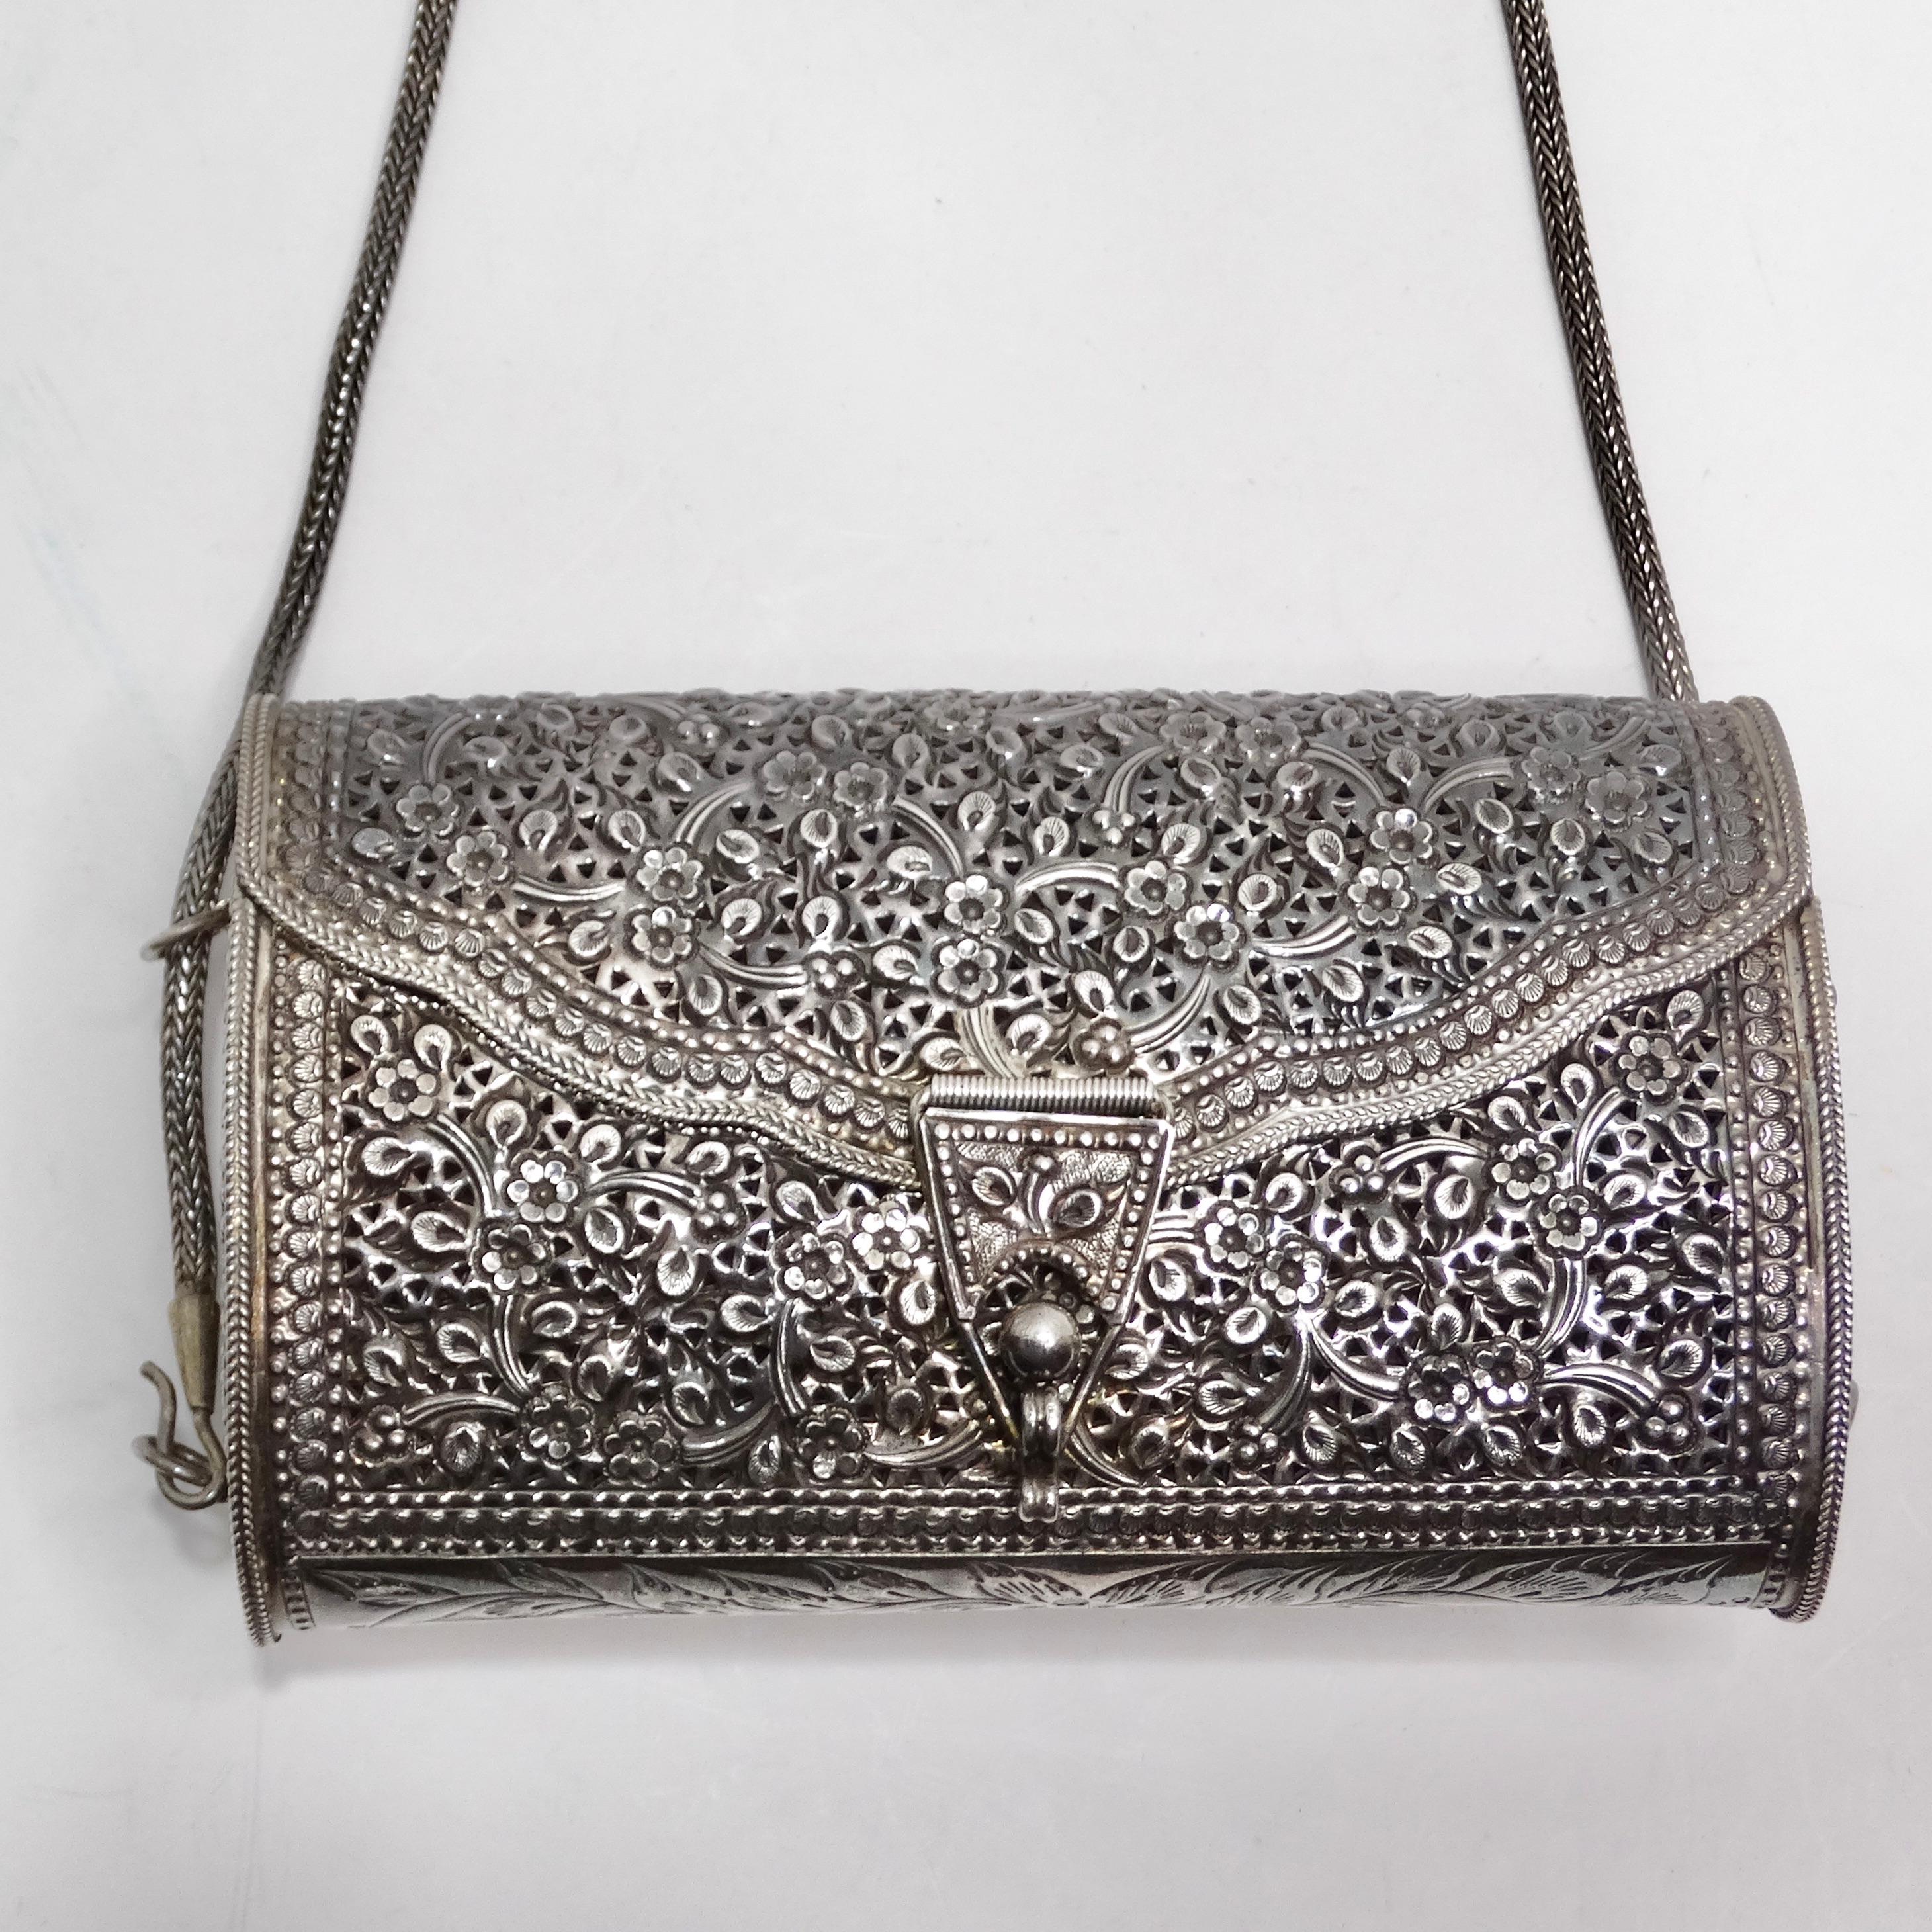 1970s Pure Silver Crossbody Handbag In Excellent Condition For Sale In Scottsdale, AZ